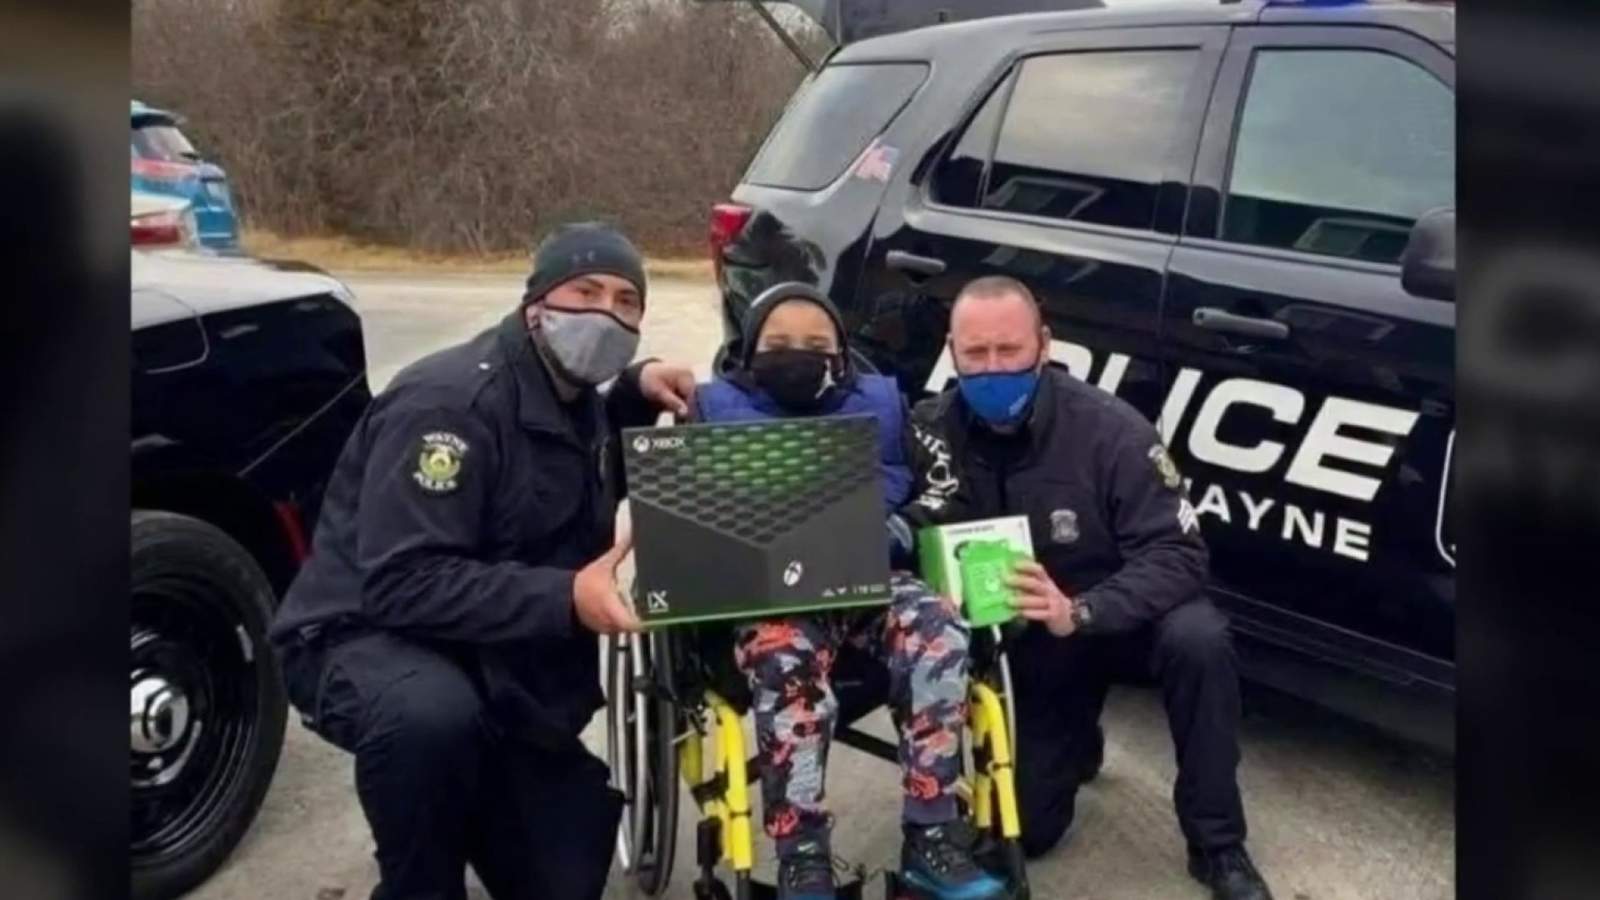 Officers raise money to get Ann Arbor boy who survived terrible crash wheelchair accessible vehicle